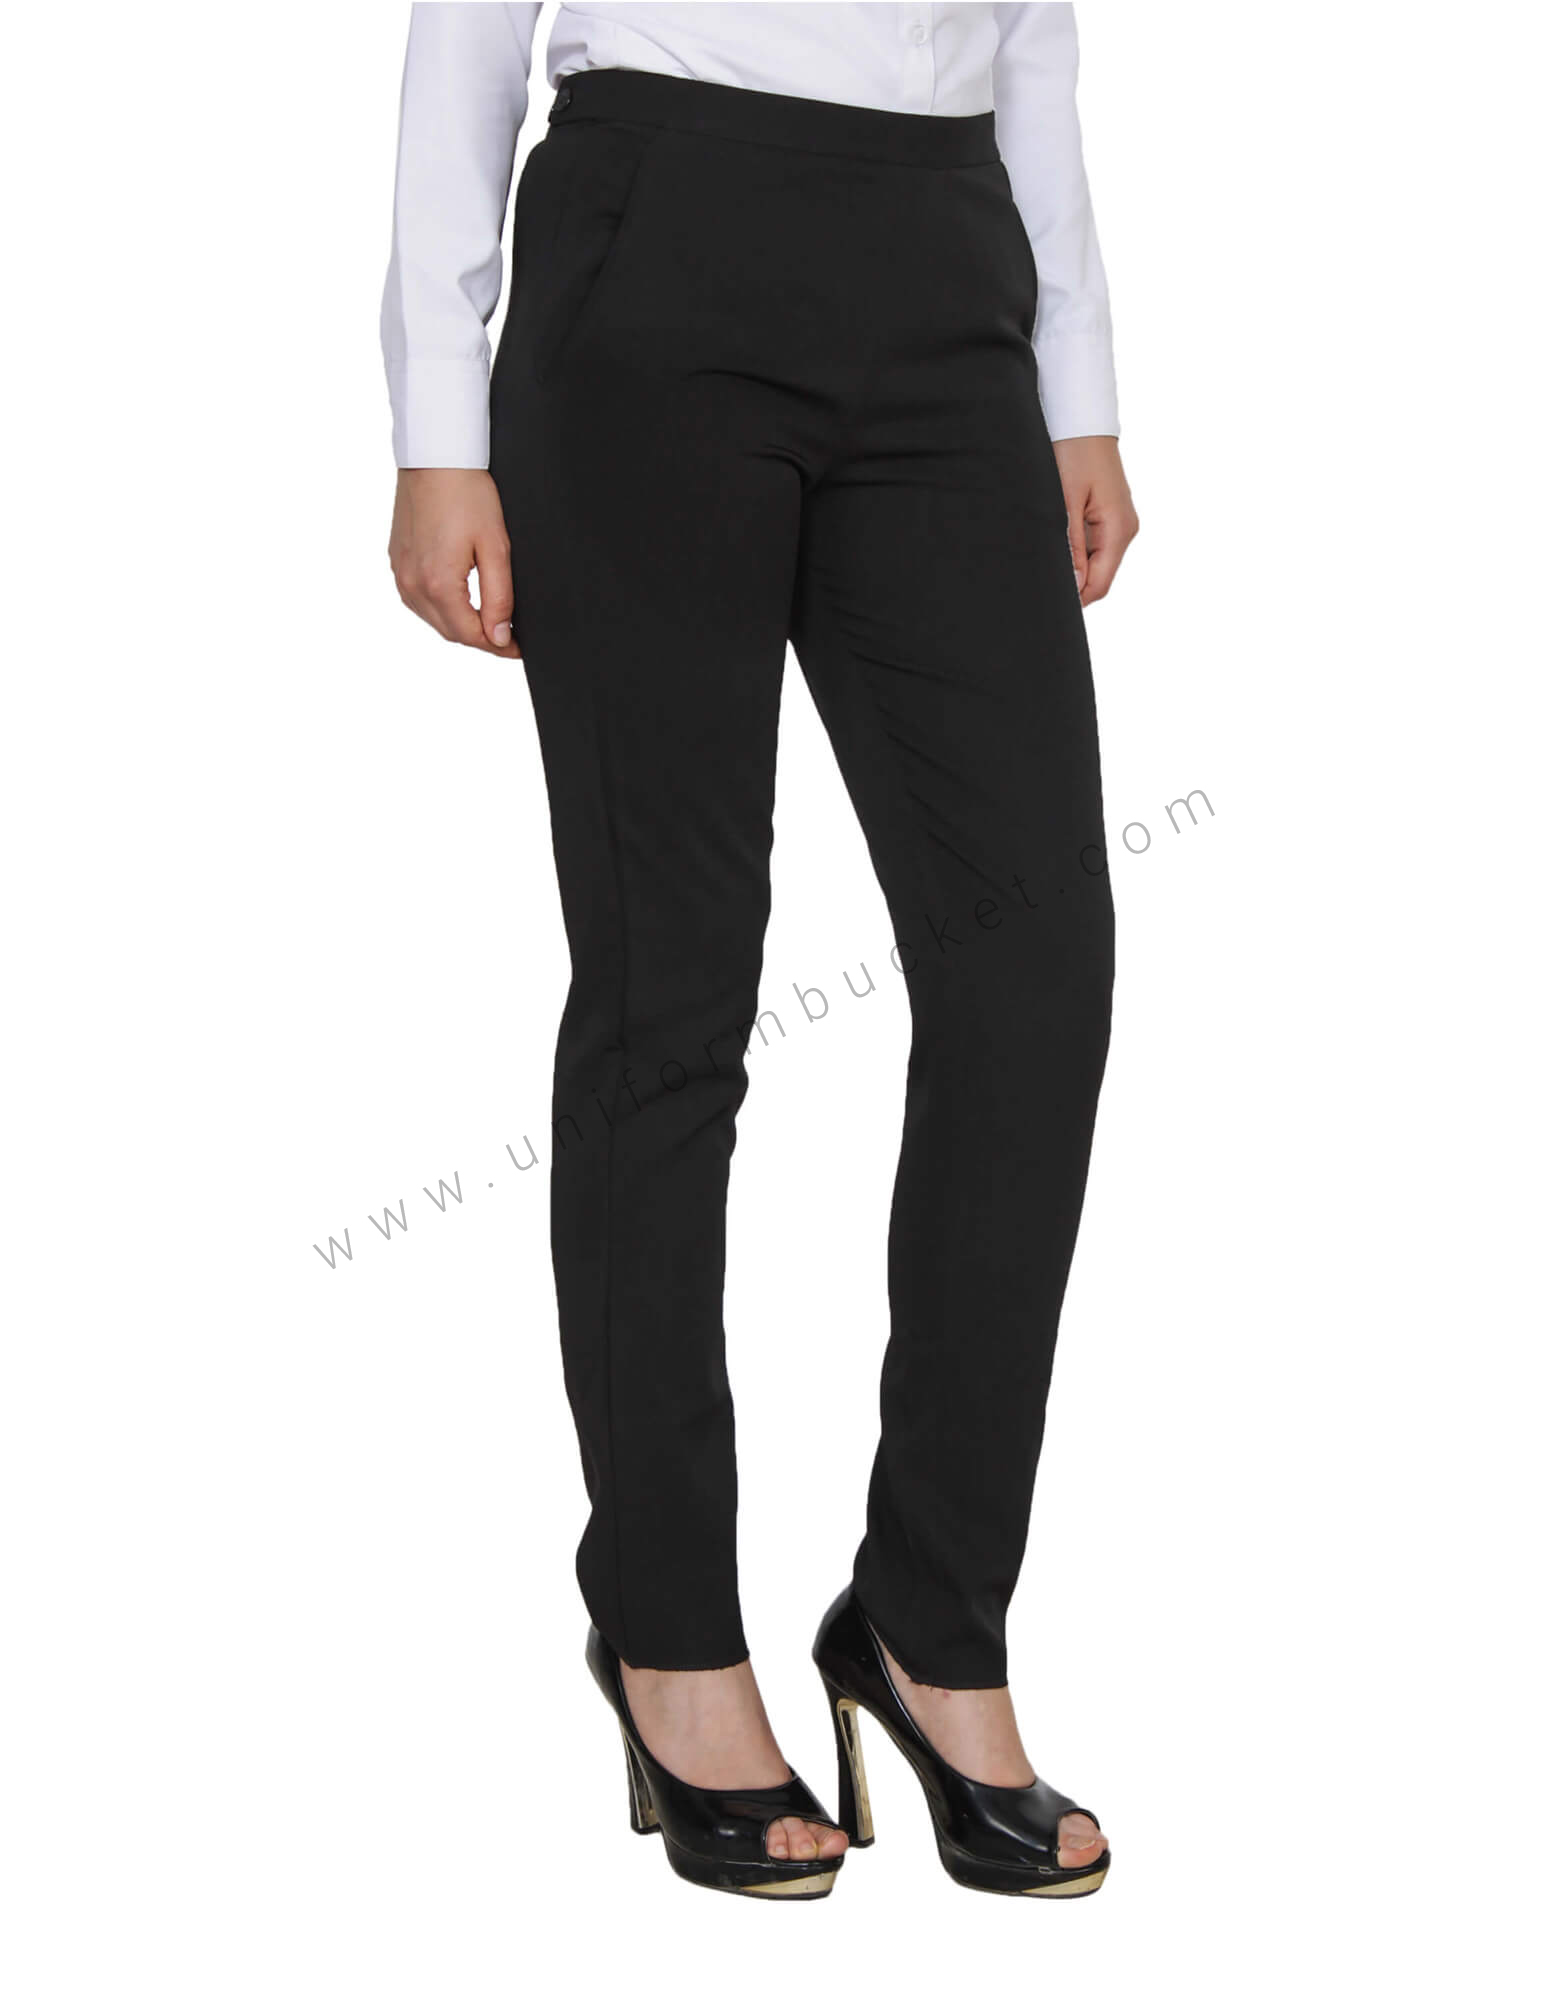 Only 76.00 usd for Women's Pure Cashmere Pants Online at the Shop